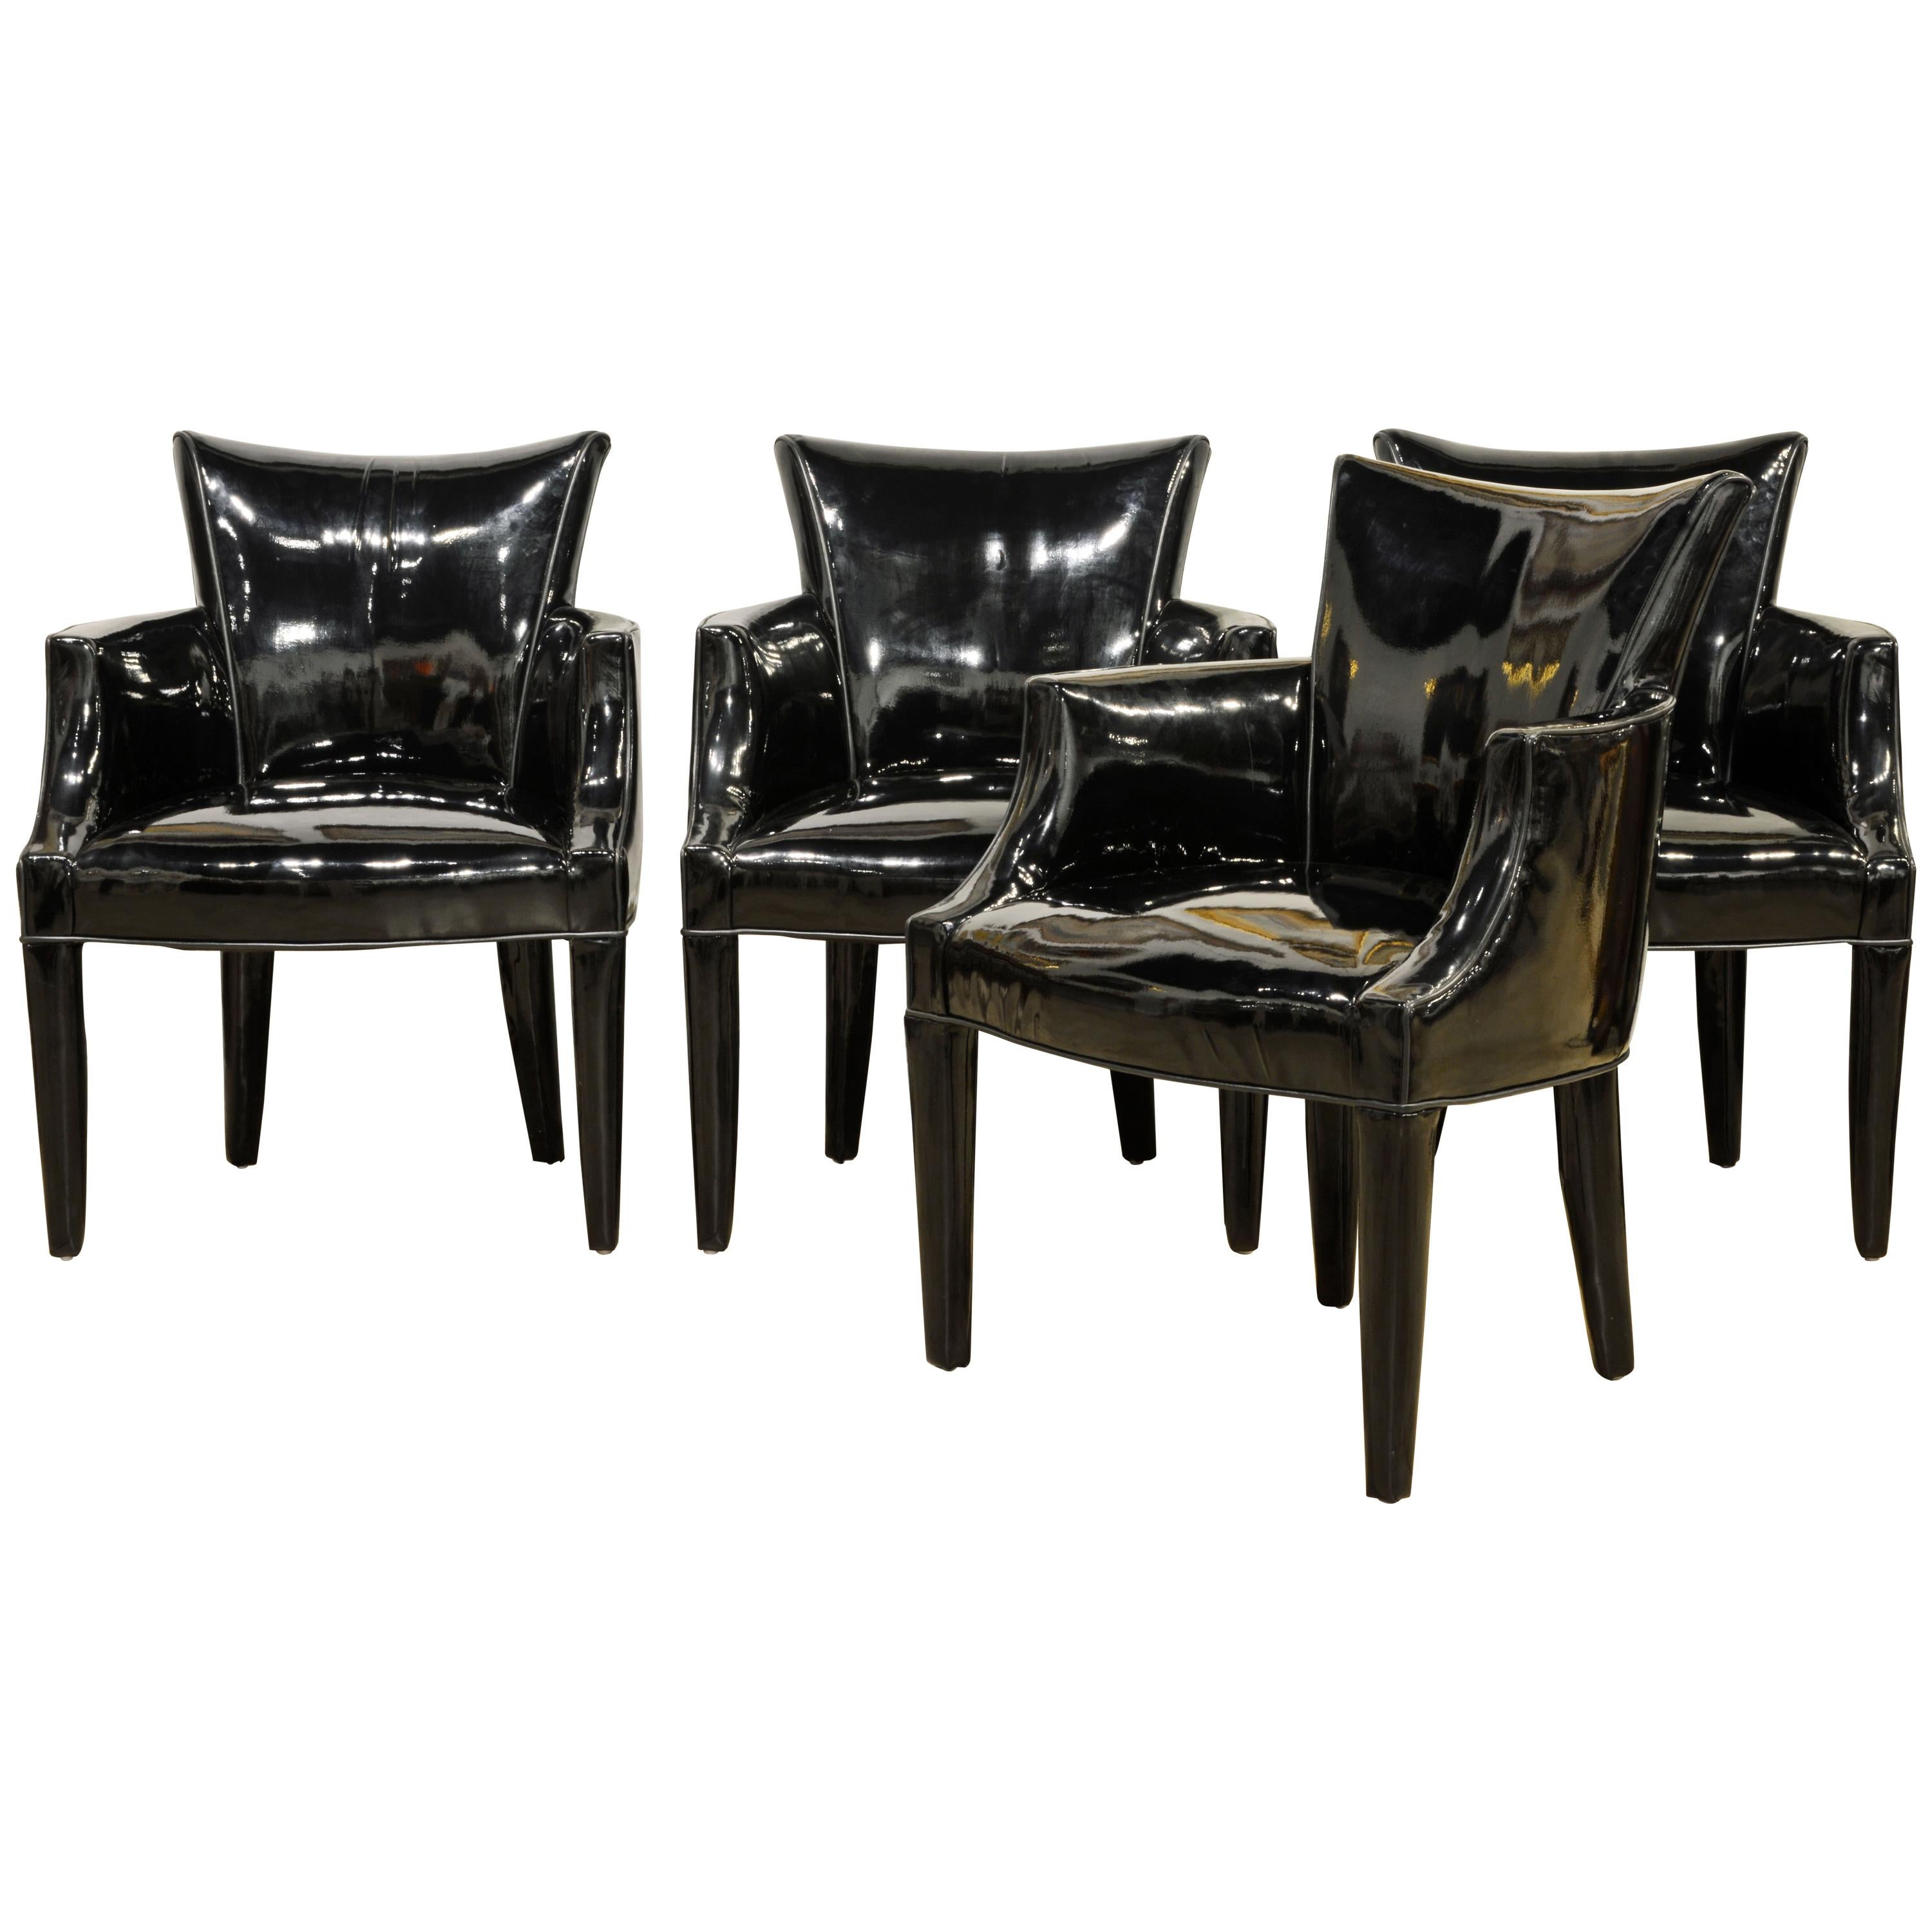 Group of Four Black Vinyl Covered Salon Armchairs by John Hutton for Donghia